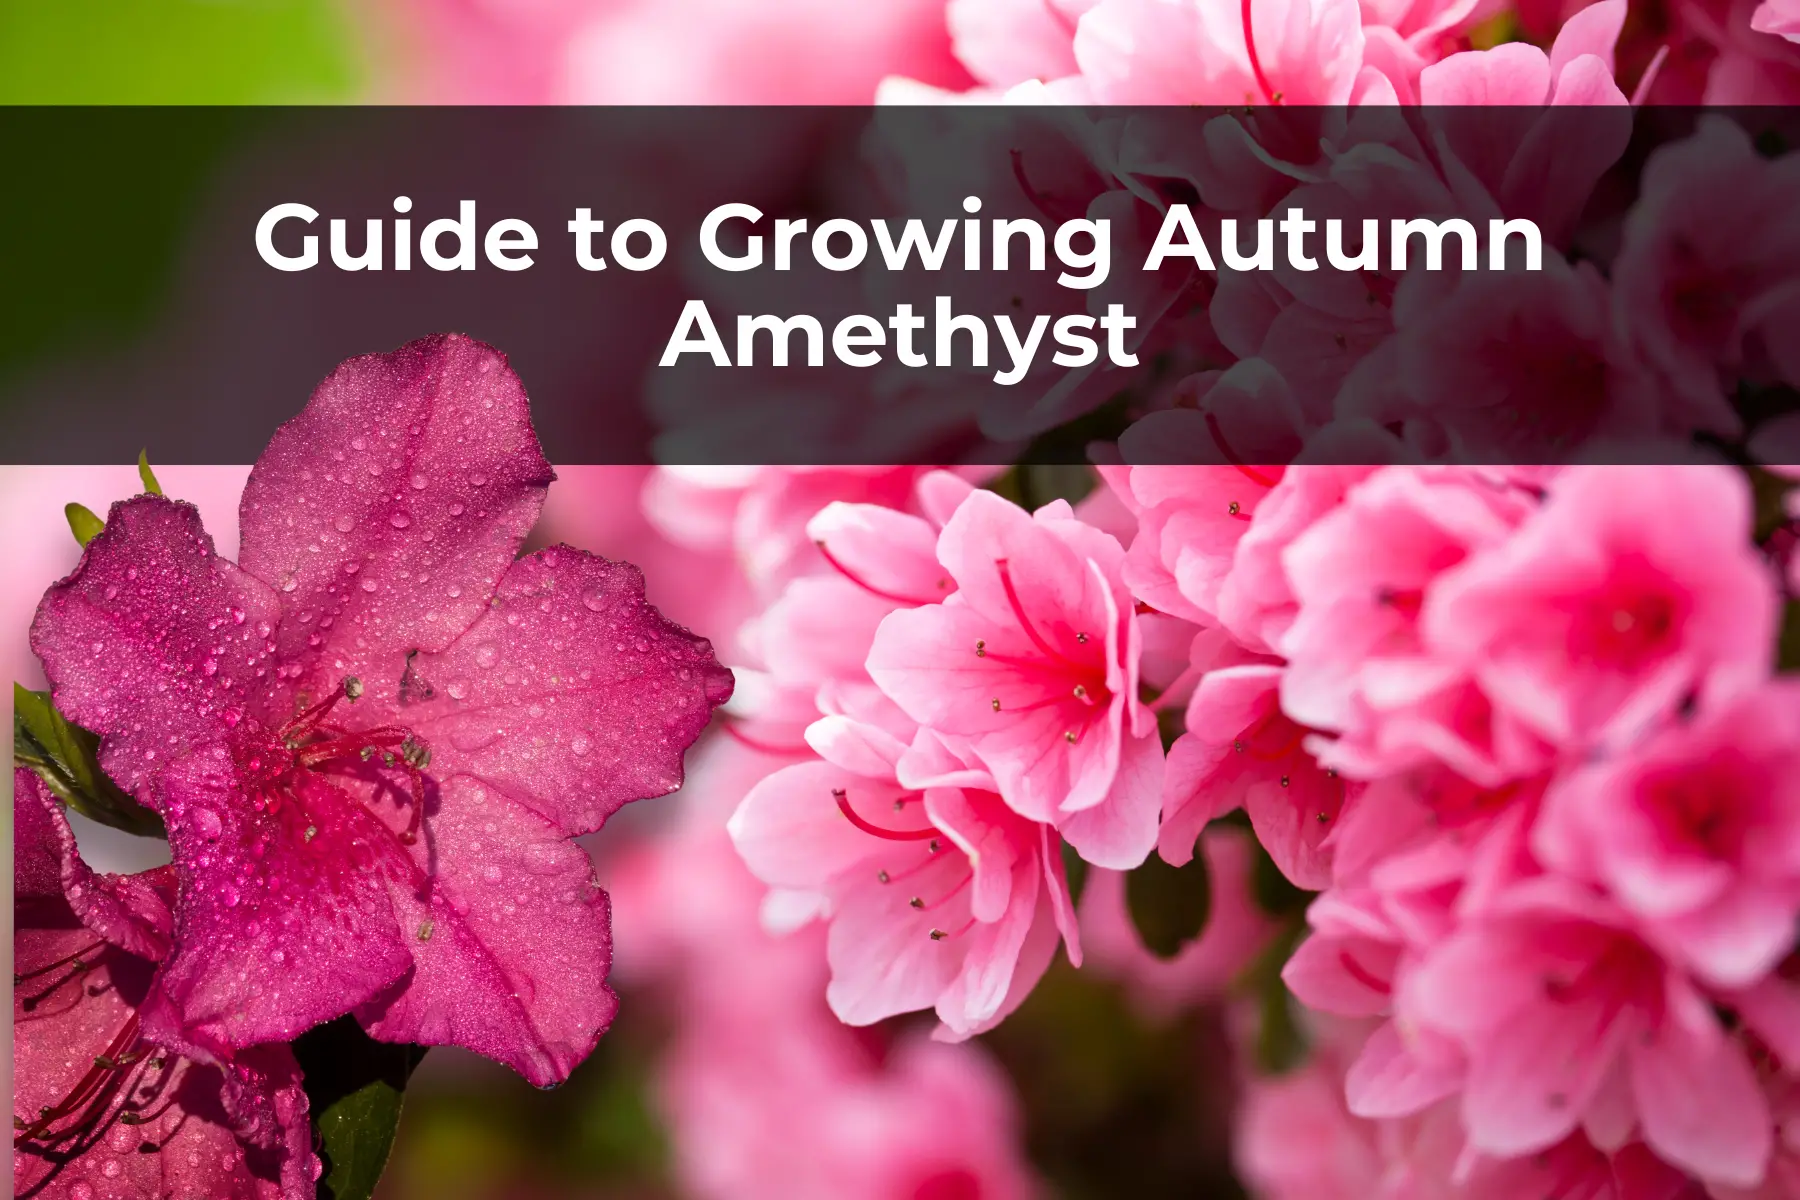 Guide to Growing Autumn Amethyst